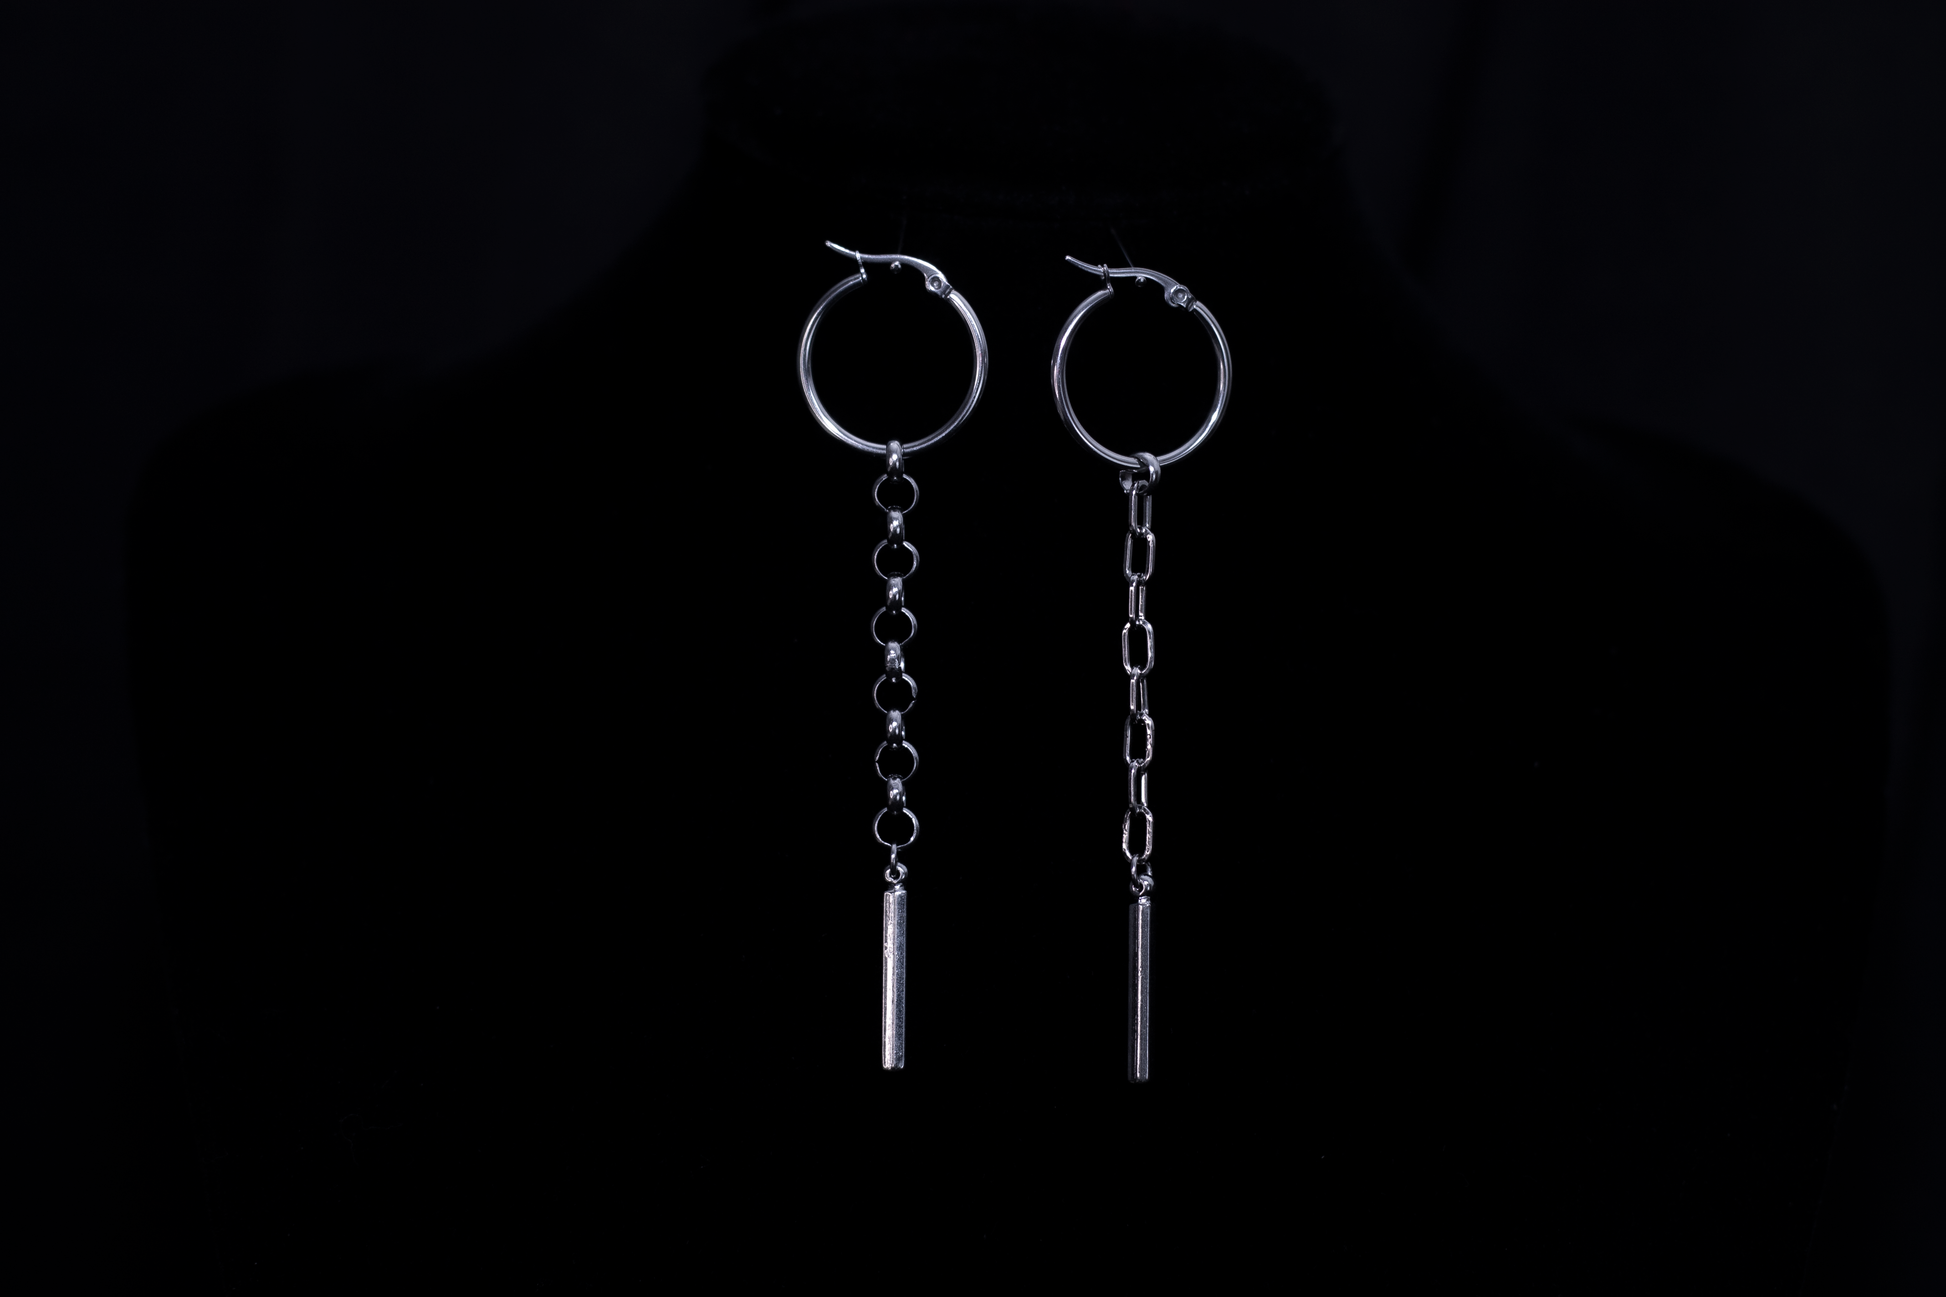 Elegant Myril Jewels hoop earrings featuring long chains, encapsulating neo-gothic allure with a dark-avantgarde twist for the gothic style connoisseur. Ideal for diverse occasions from Halloween to everyday wear.